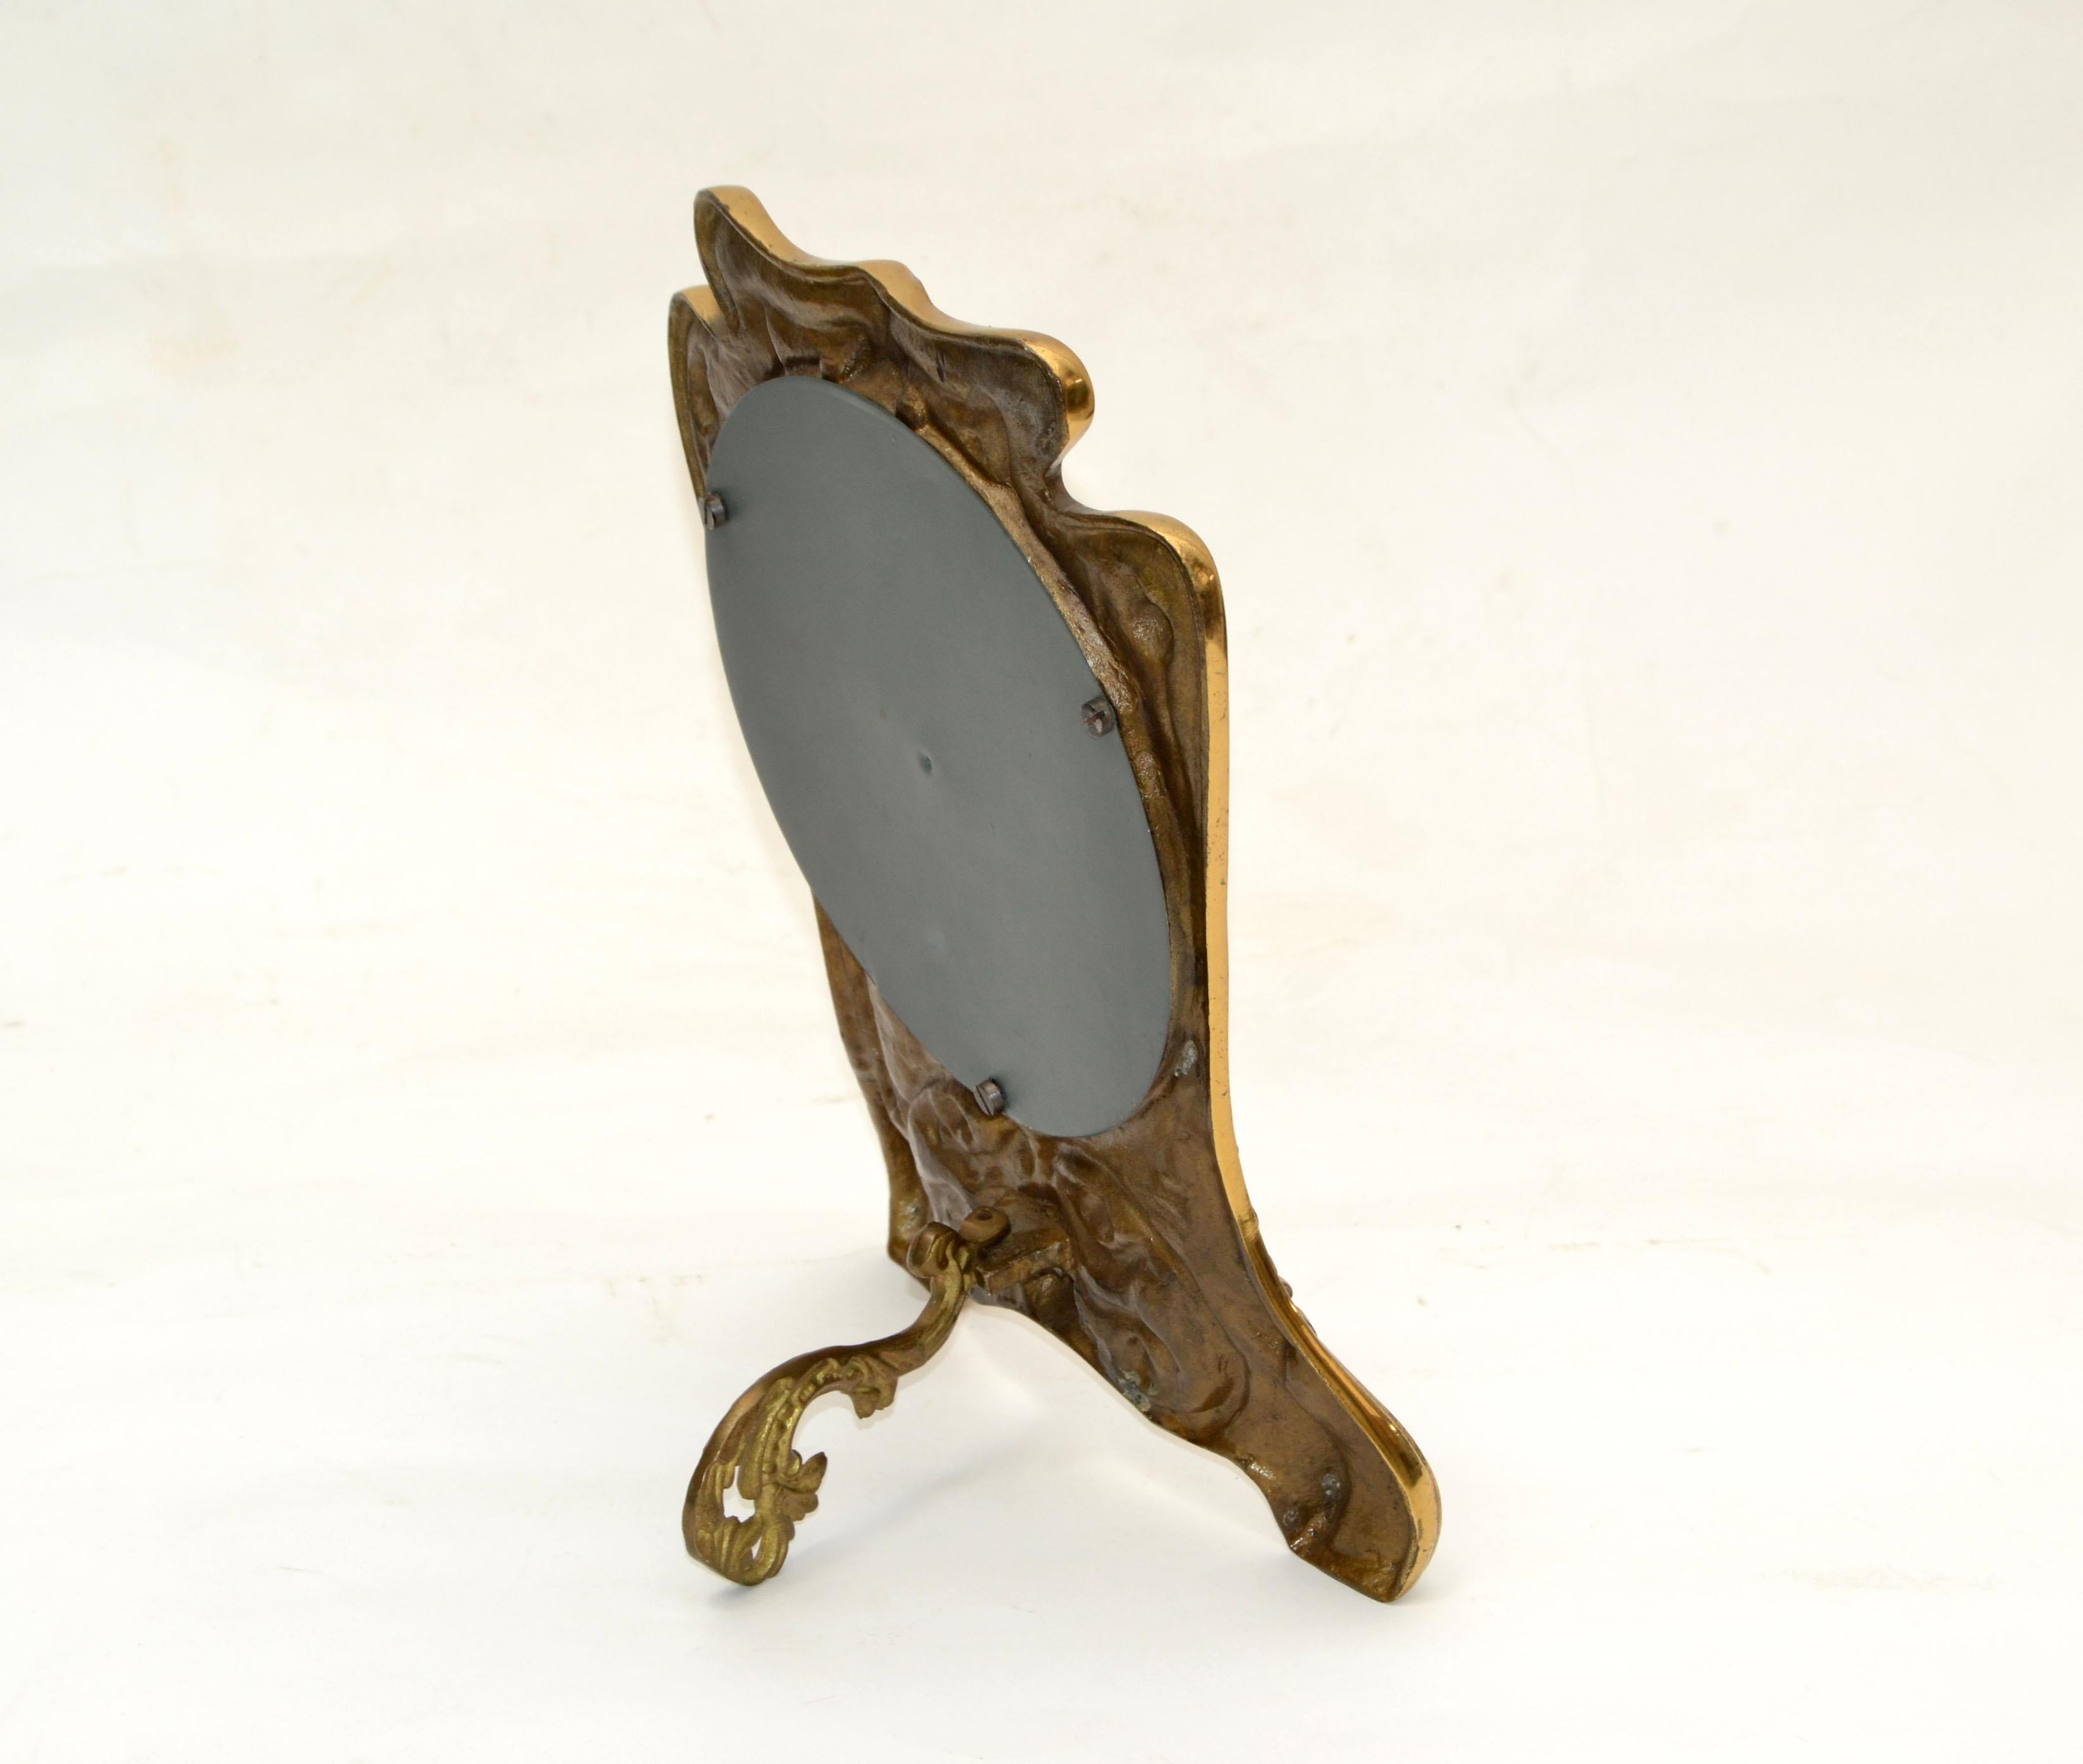 Art Nouveau Whimsical Handcrafted Golden Bronze Table Mirror Vanity Mirror 1940 In Good Condition For Sale In Miami, FL